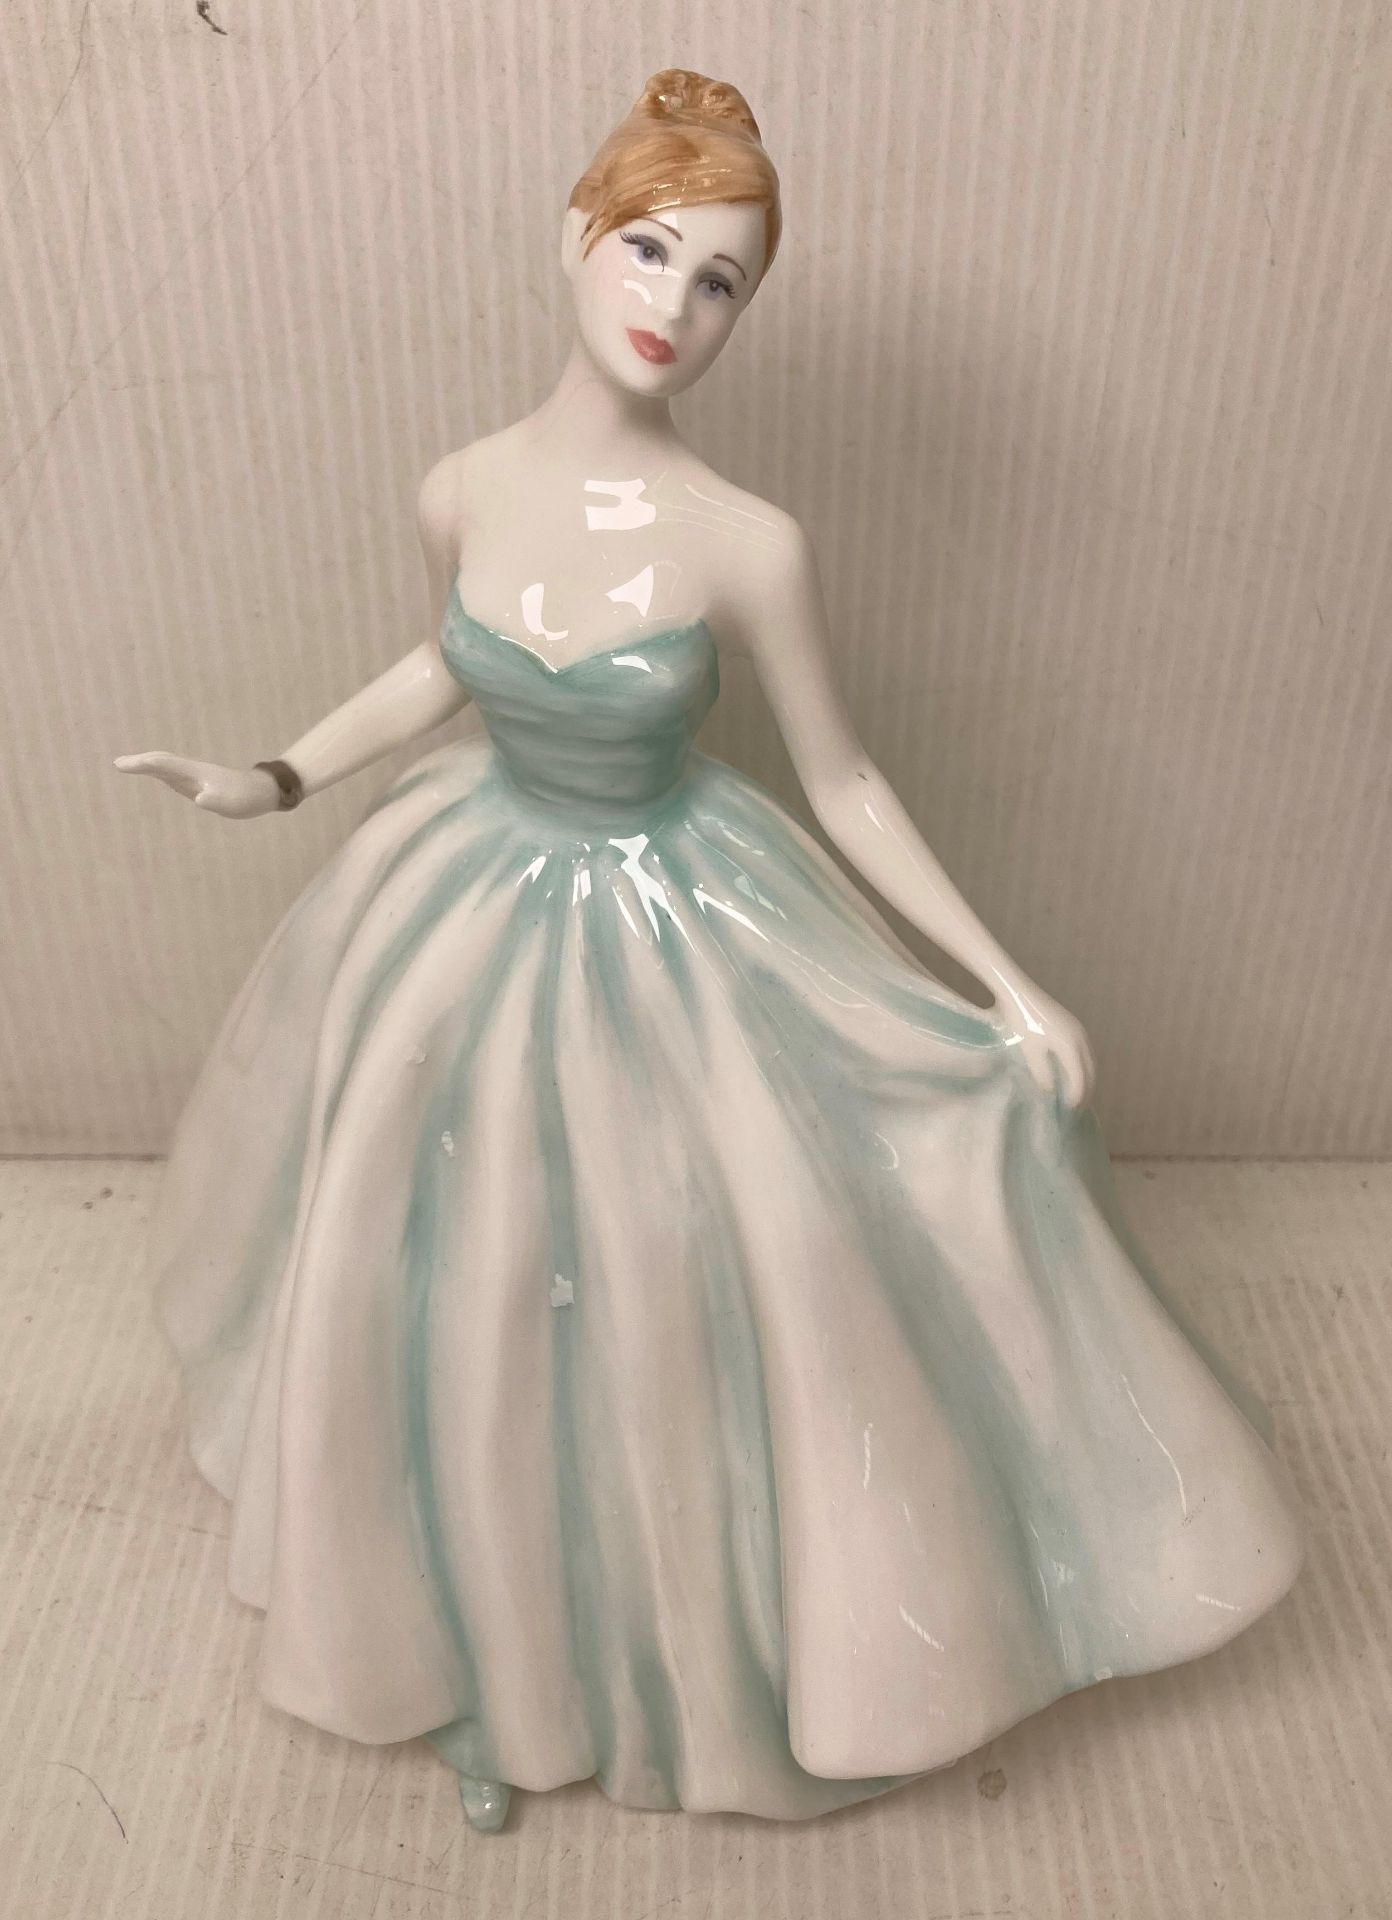 A Limited Edition Royal Doulton 'Caroline' figurine with box and authenticity no: 0096/1000 - Image 2 of 3